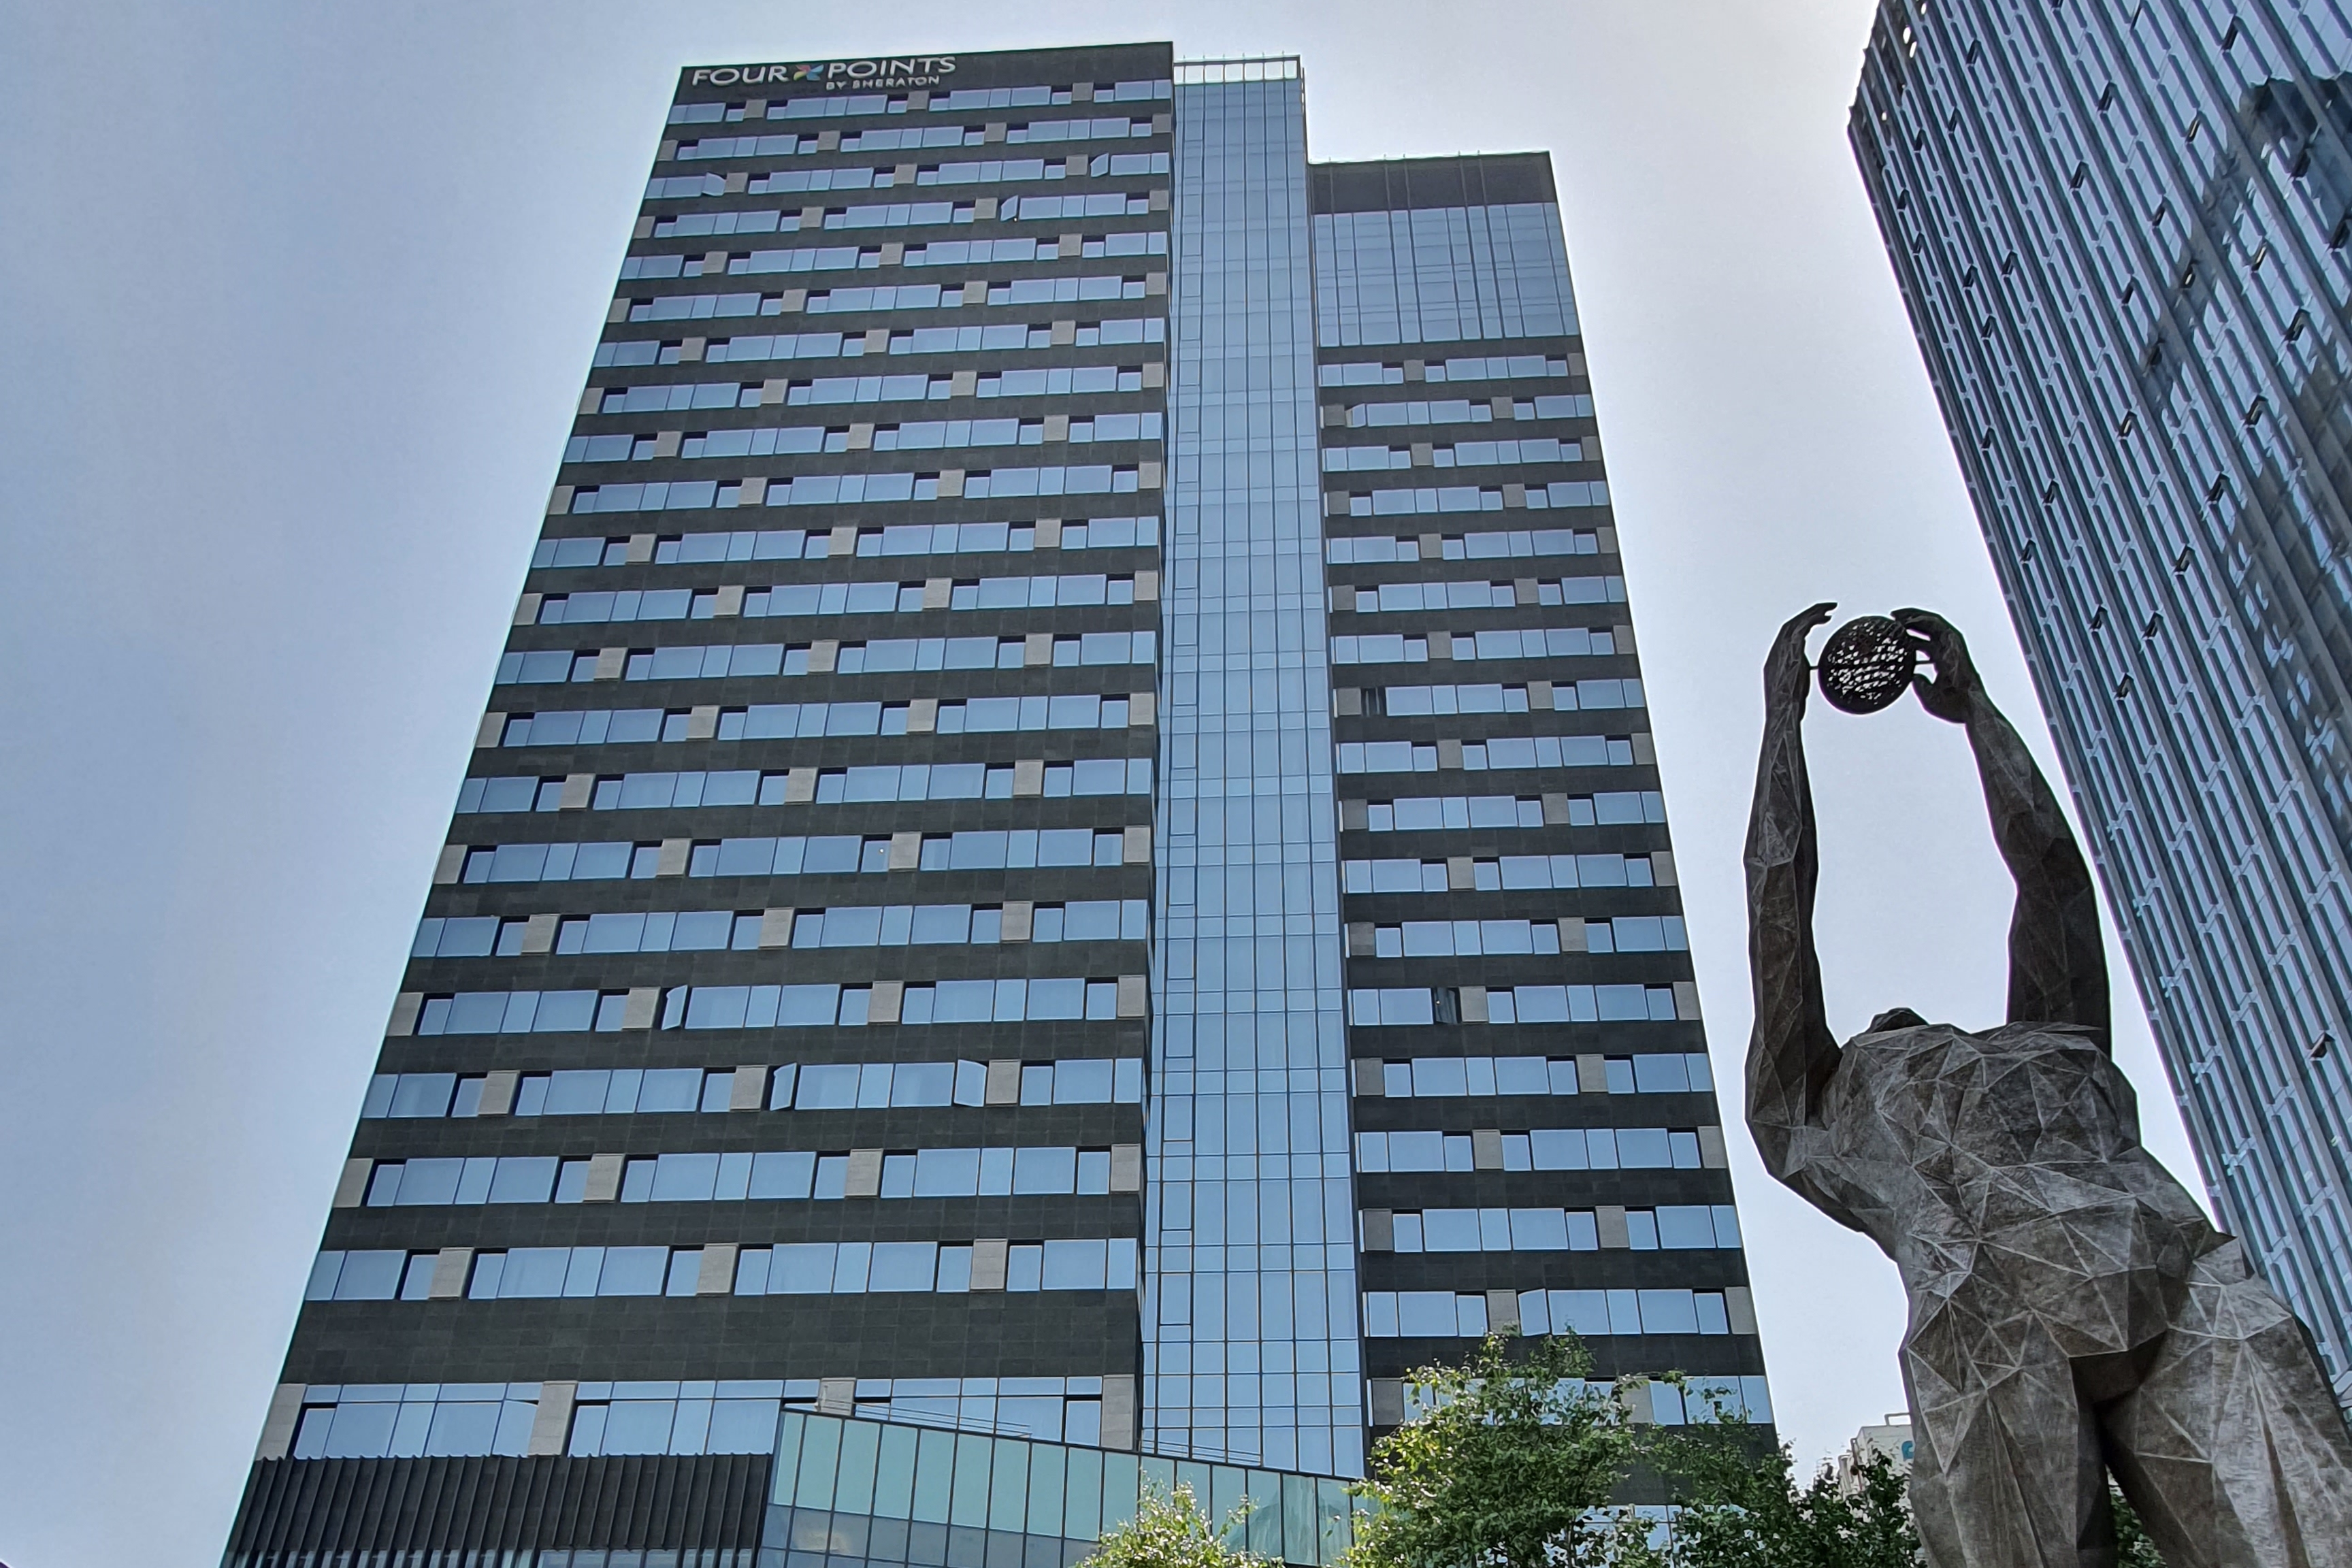 Four Points by Sheraton Josun, Seoul Myeongdong0 : Exterior view of the hotel building in the center and a full body figure with arms outstretched on the right